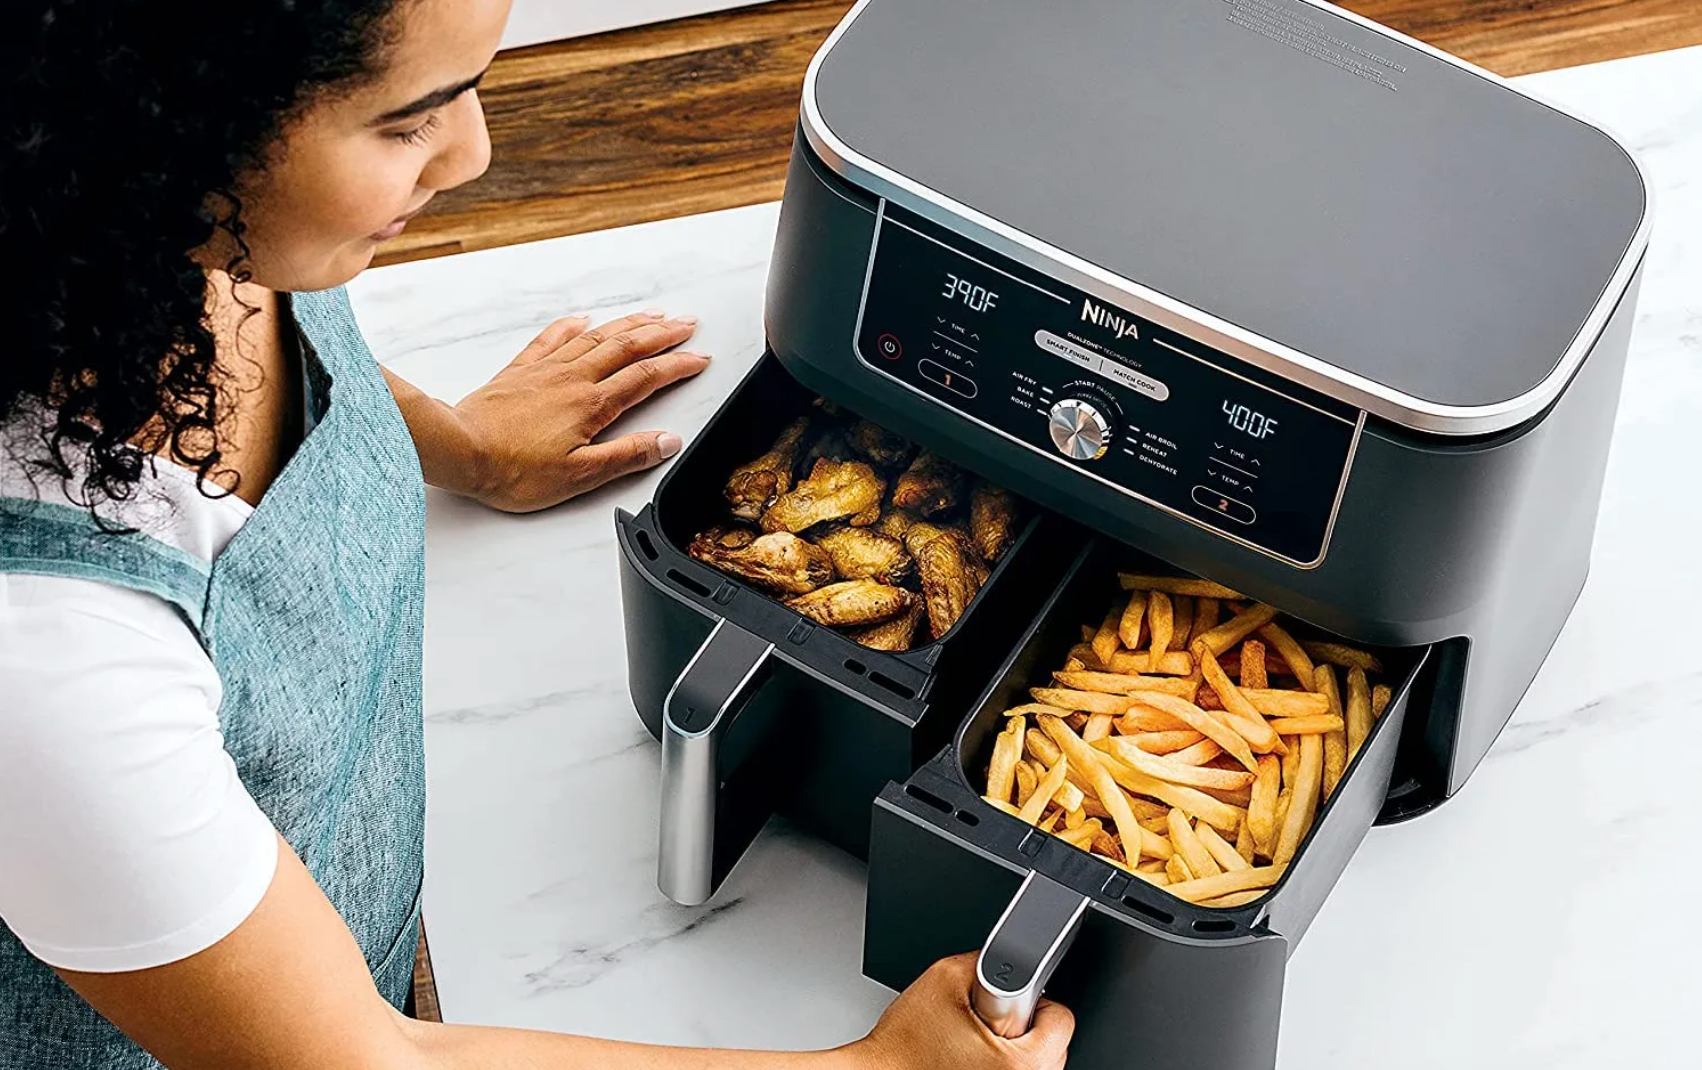 Black Friday air fryer deals: You have serious options from Ninja, Chefman,  and more